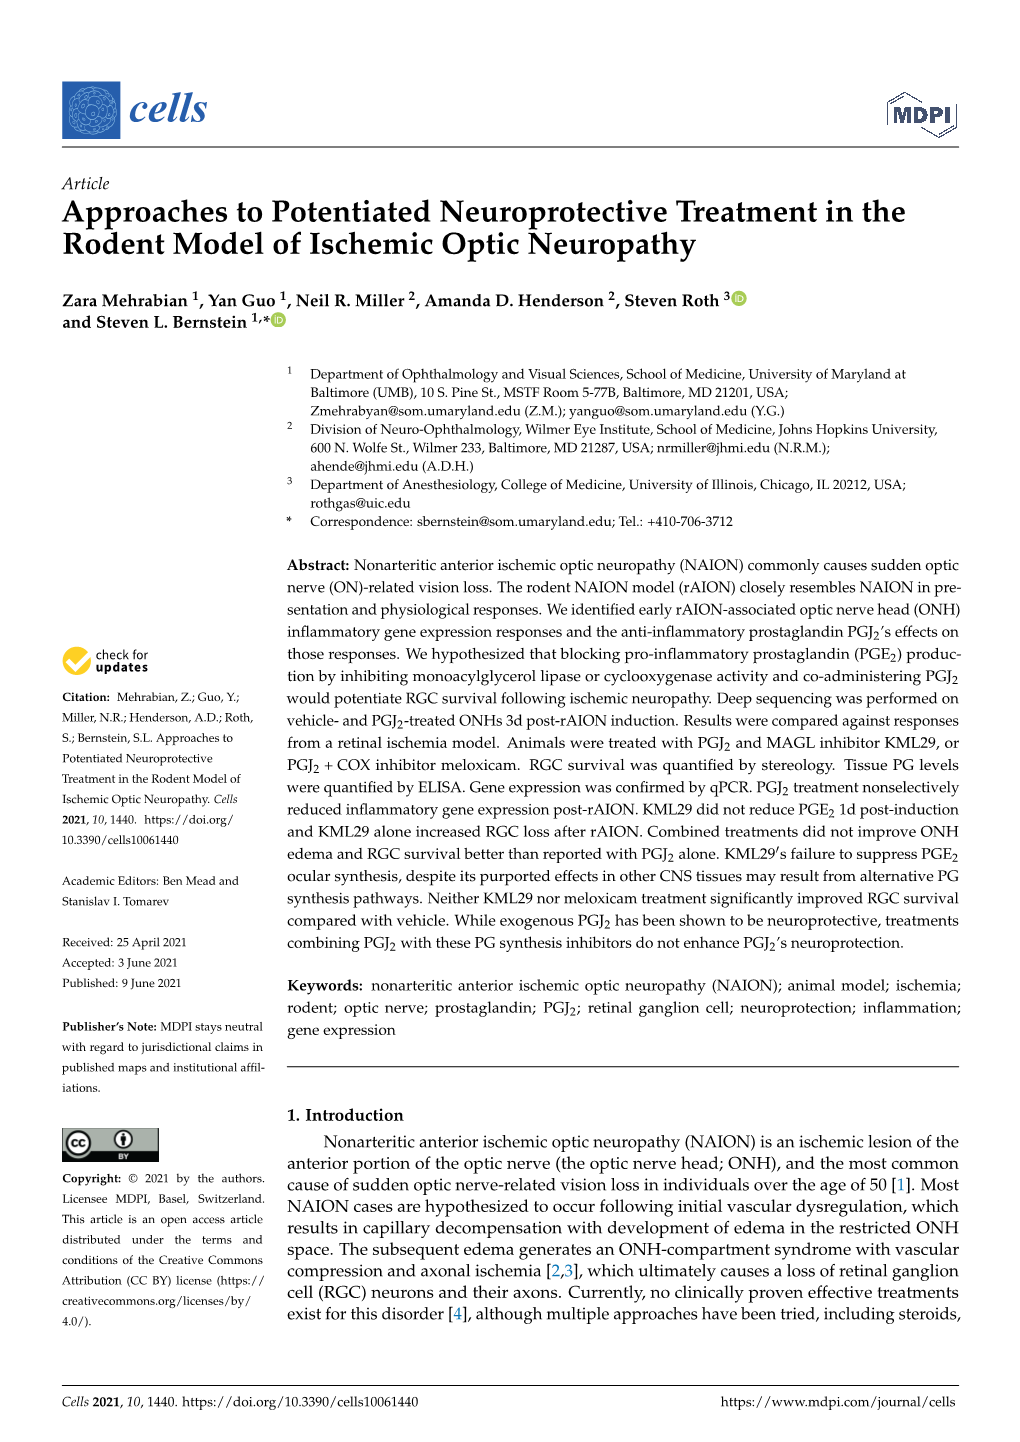 Approaches to Potentiated Neuroprotective Treatment in the Rodent Model of Ischemic Optic Neuropathy